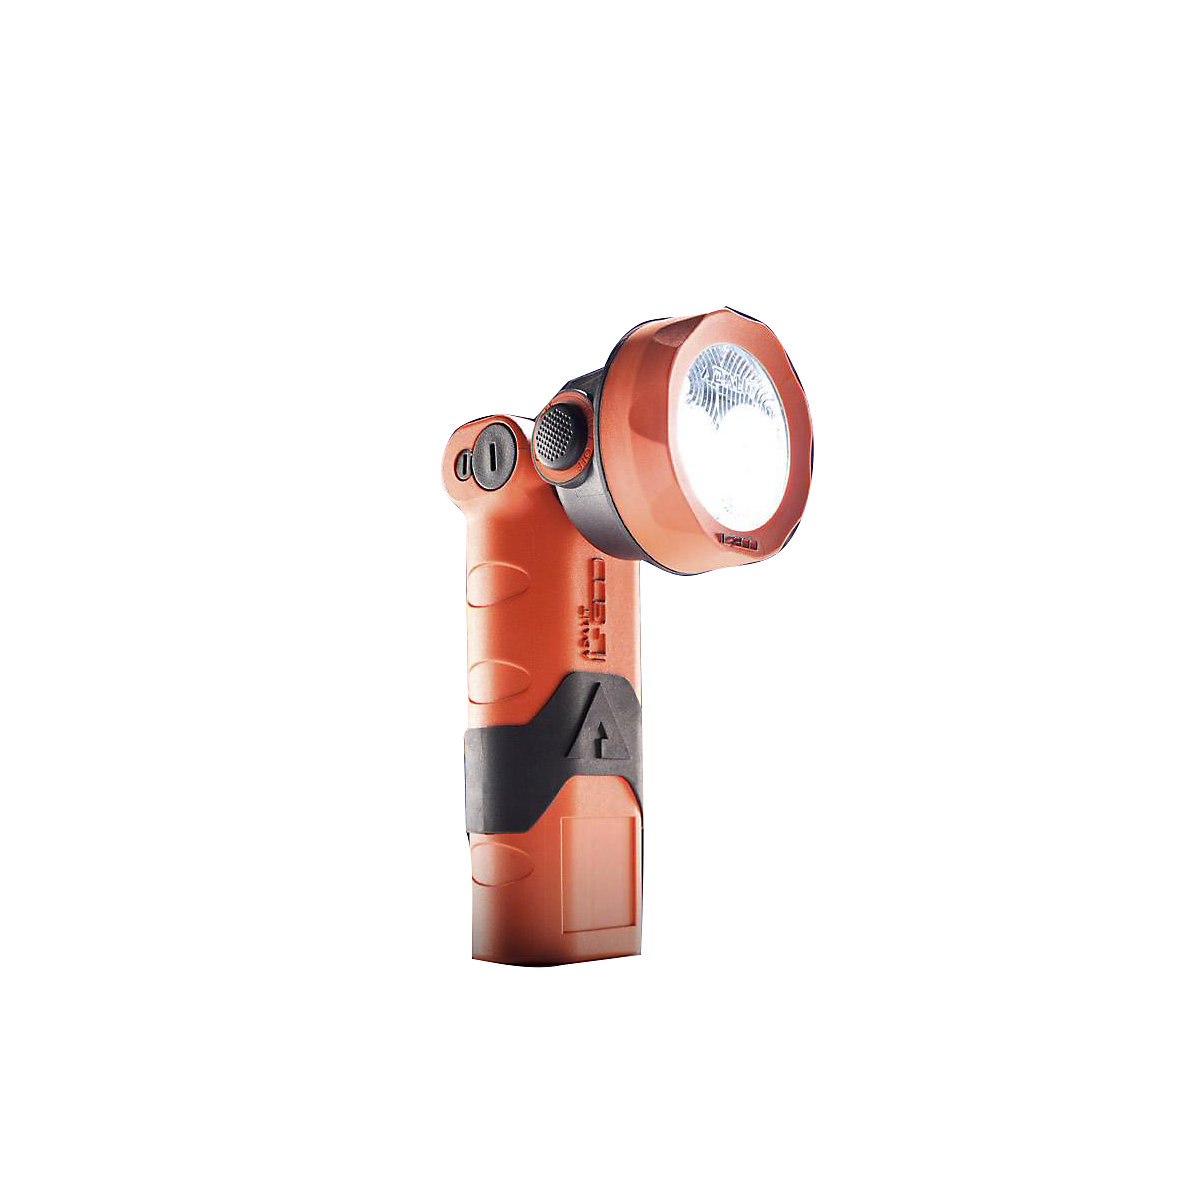 LED safety torch